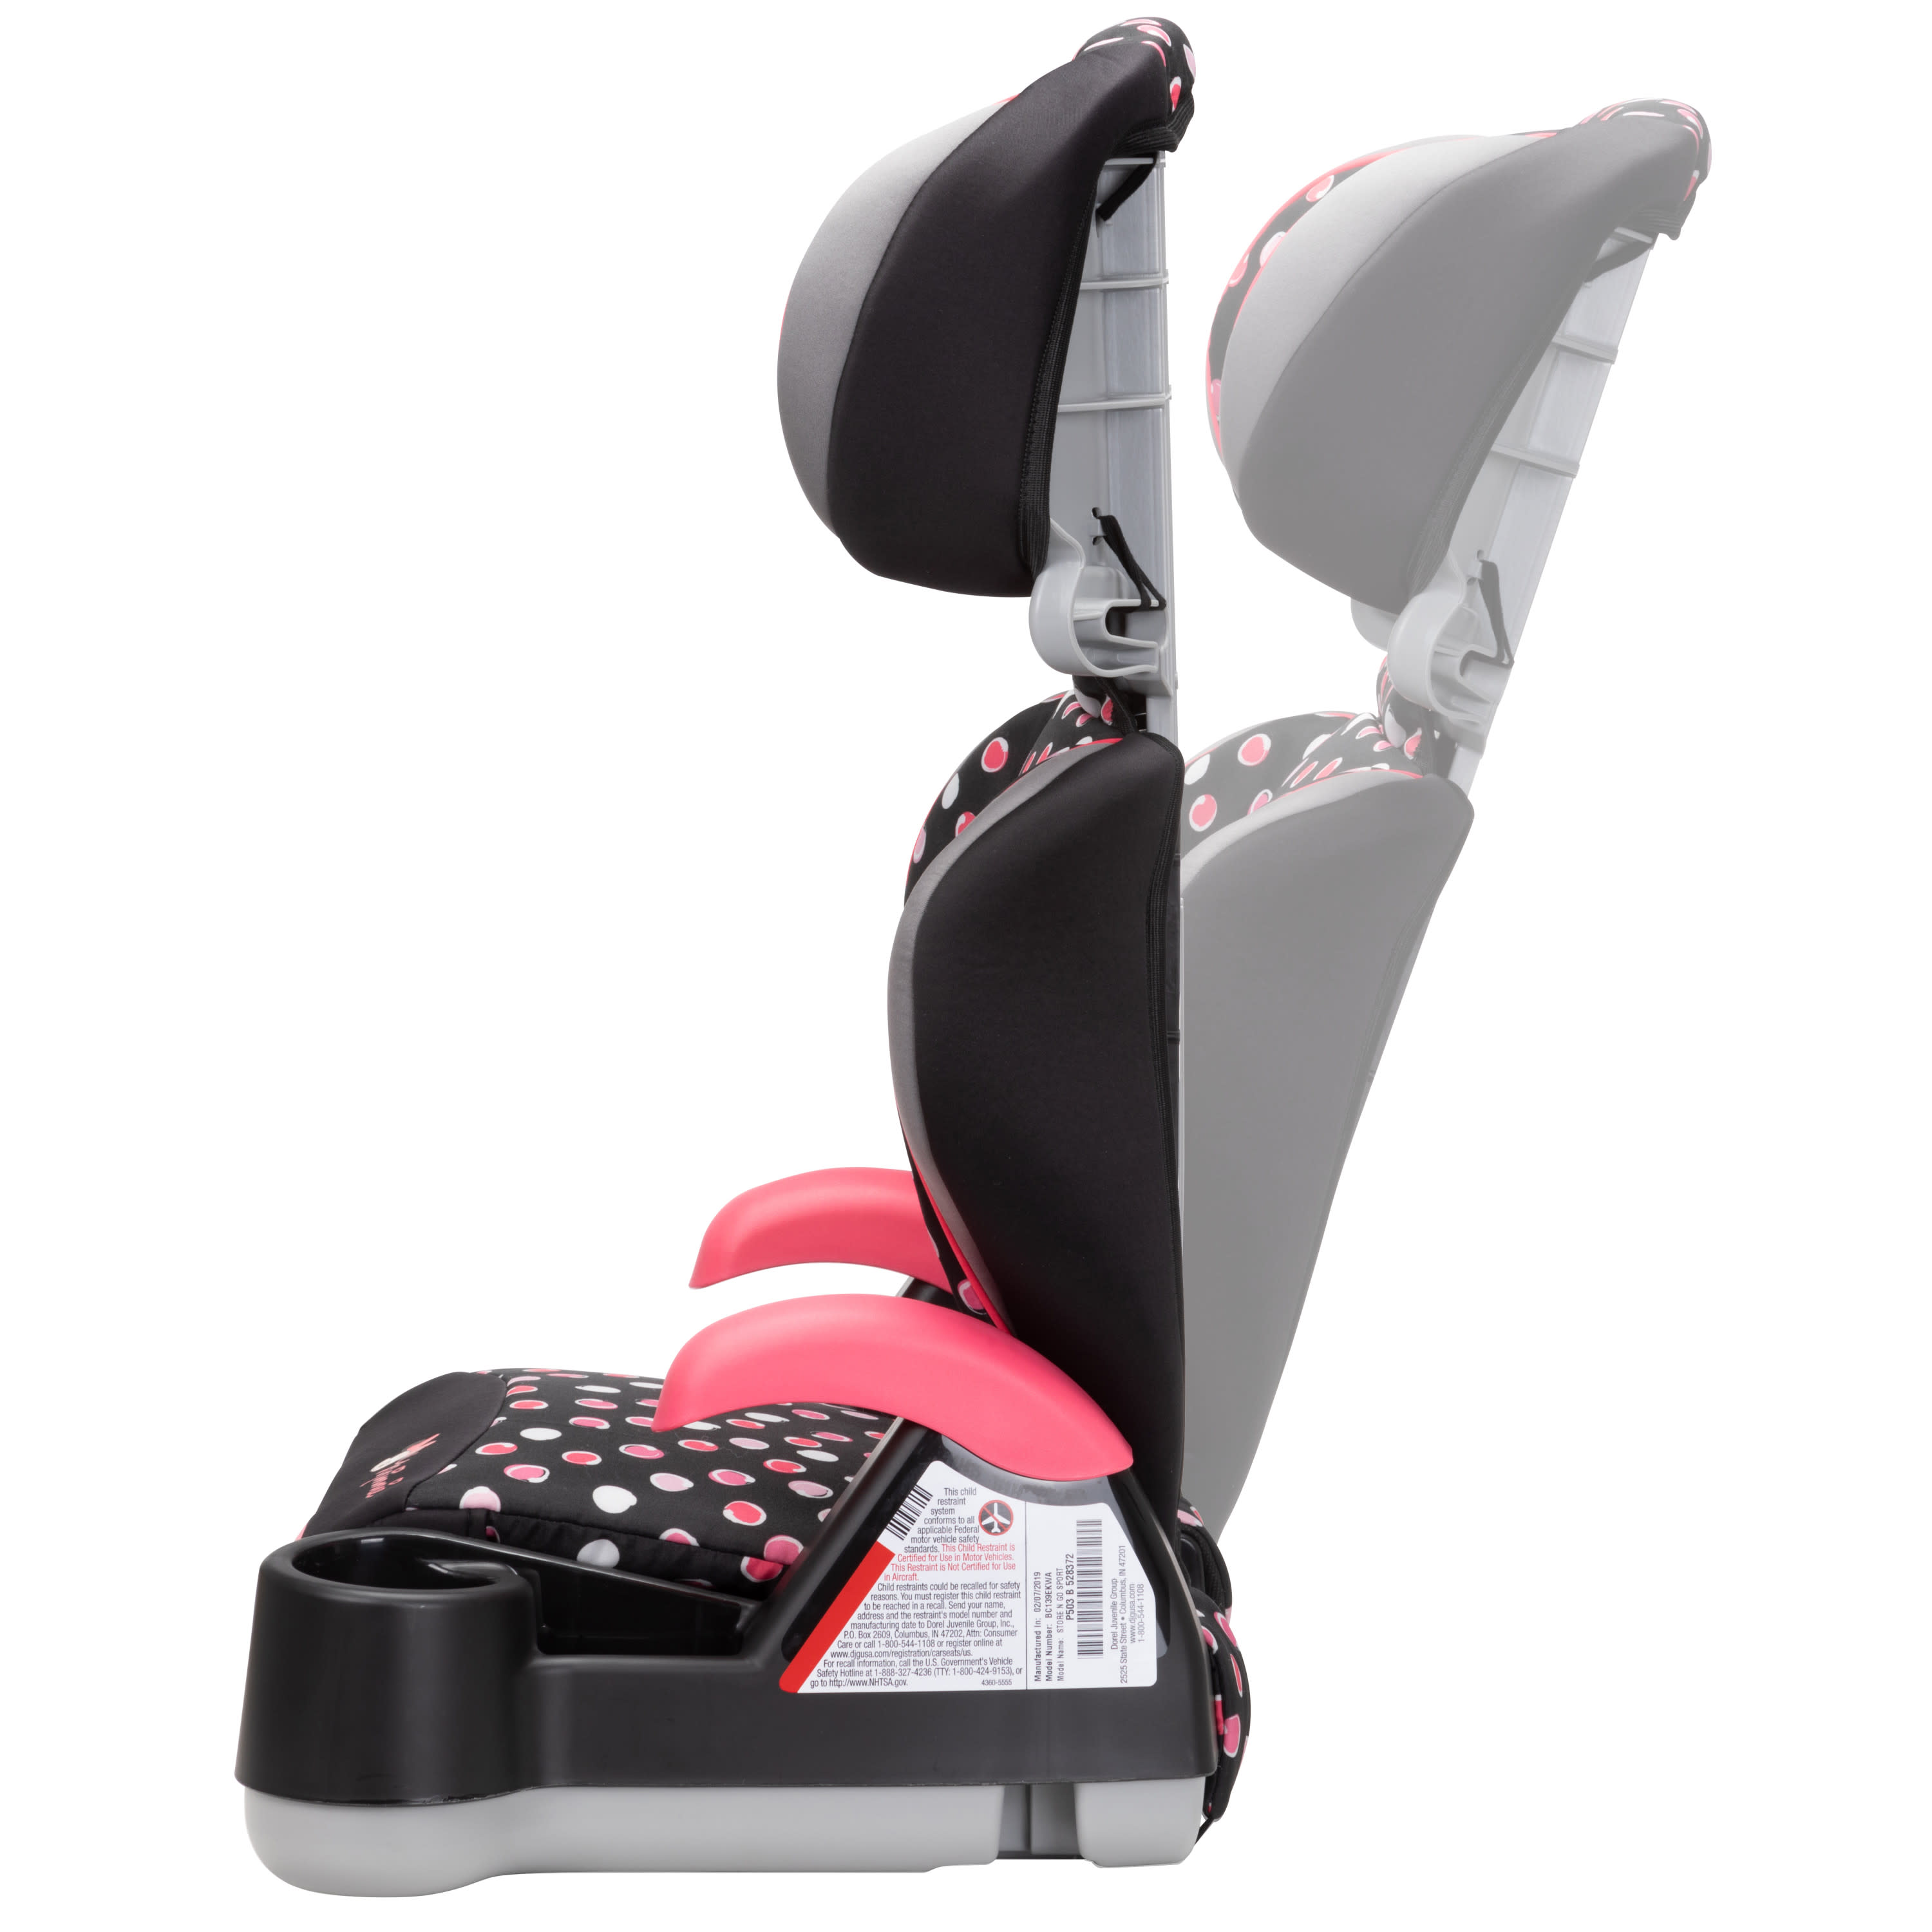 Disney Baby Store 'n Go Sport Booster Car Seat, Minnie Mash Up - image 6 of 21